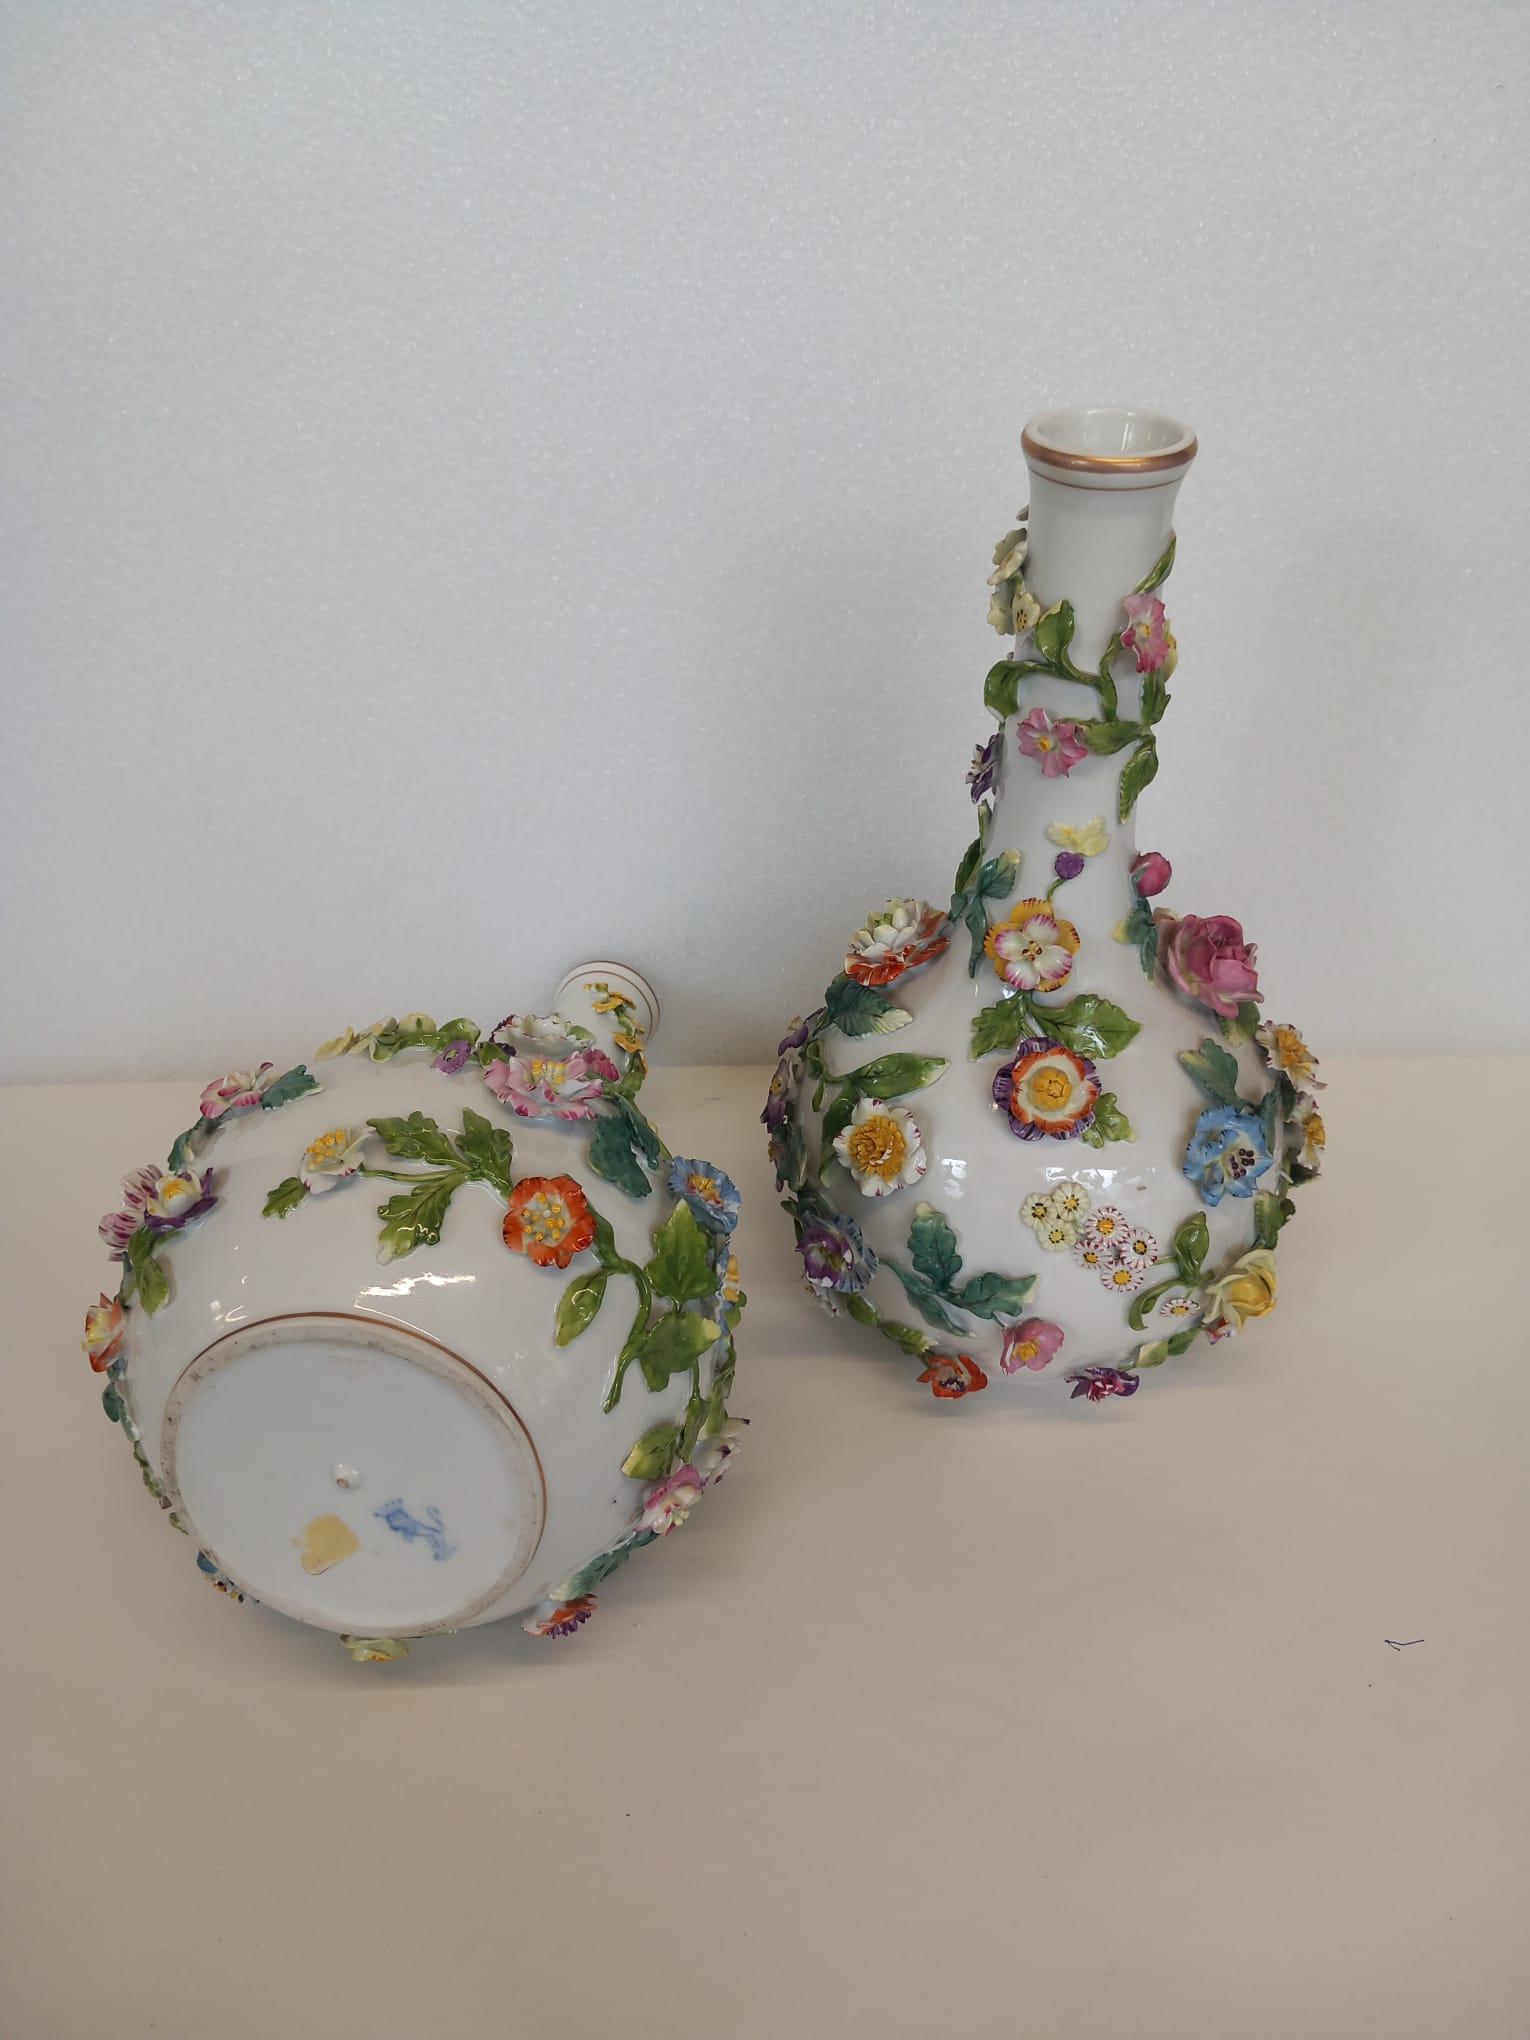 A nineteenth century pair of Dresden white porcelain vases, each encrusted with hand made ceramic flowers and leaves in the eighteenth century Meissen style.
The top edges of each case is decorated with a gold leaf painted edge, as is the bottom